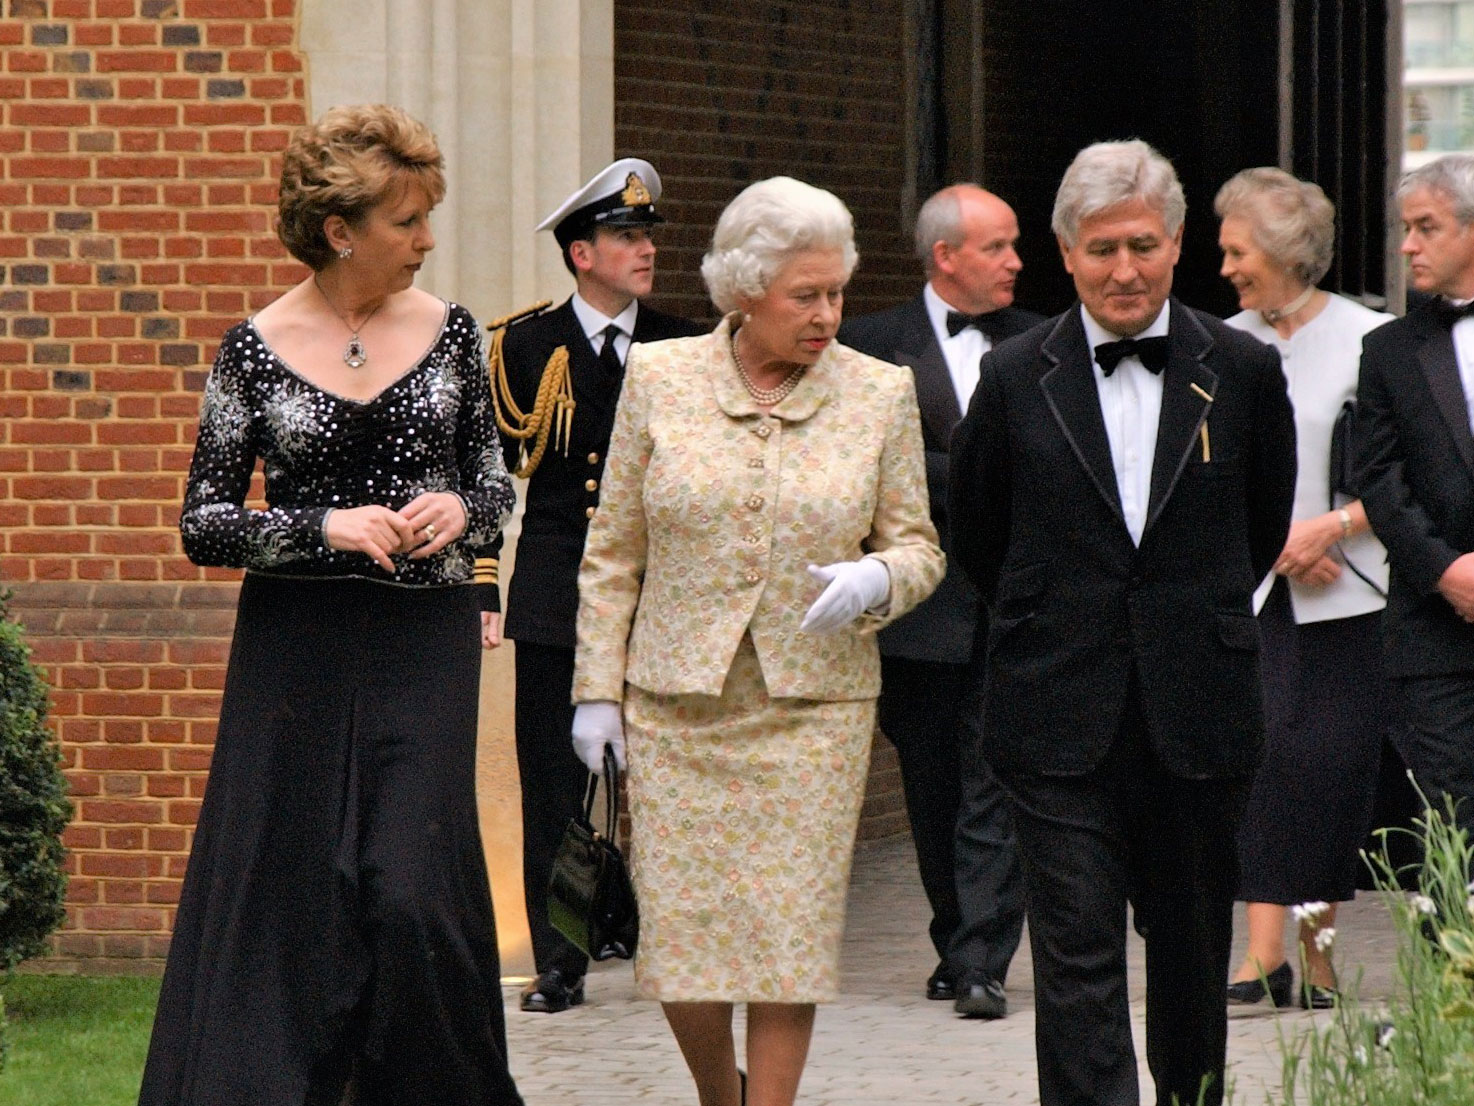 Christopher Moran with the Queen and Irish President Mary McAleese in 2005